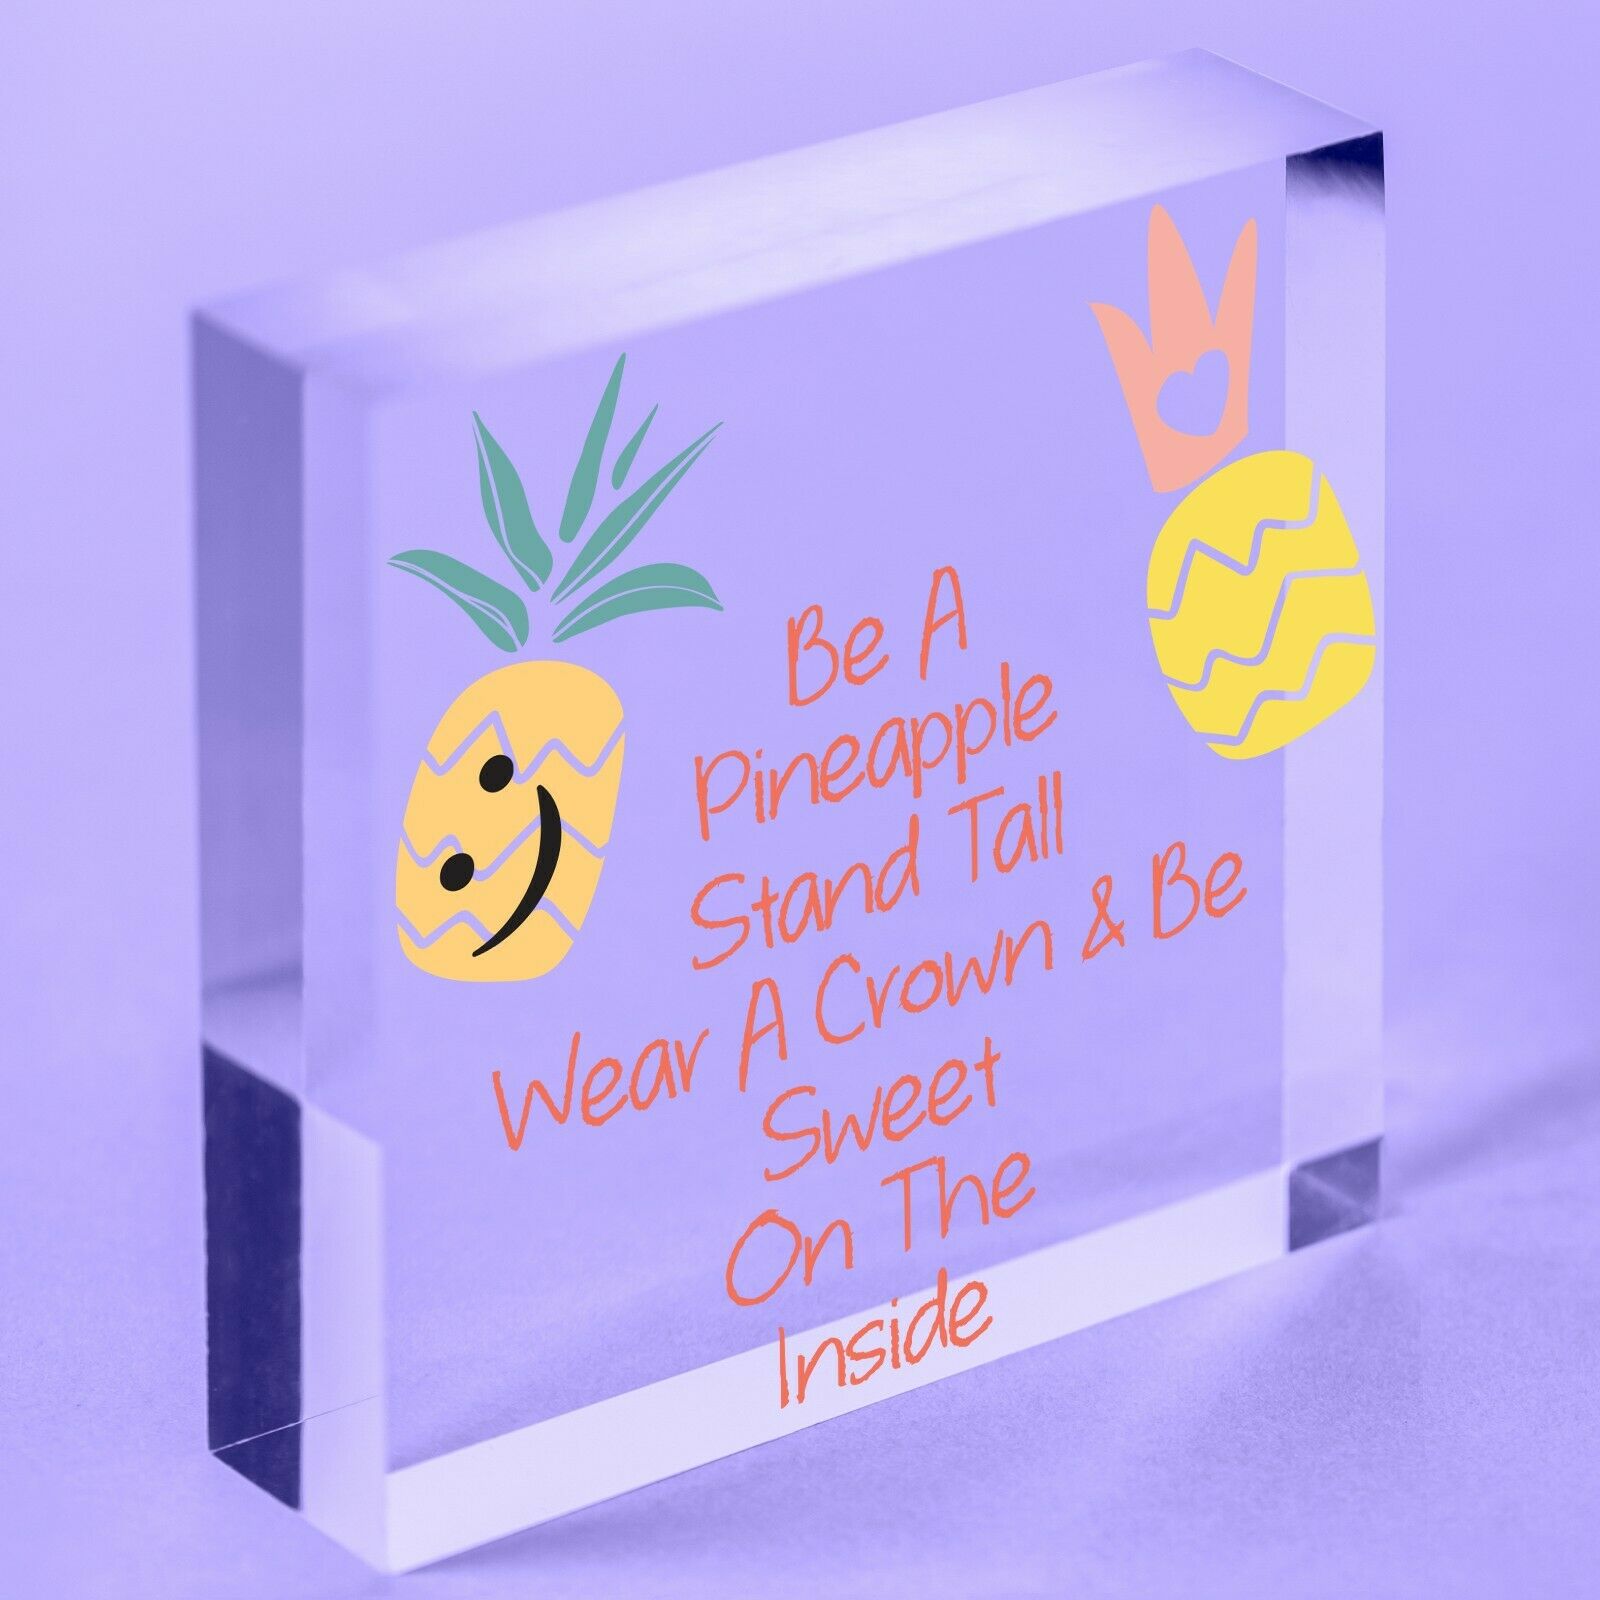 Be A Pineapple Novelty Acrylic Block Plaque Sign Funny Friendship Gift